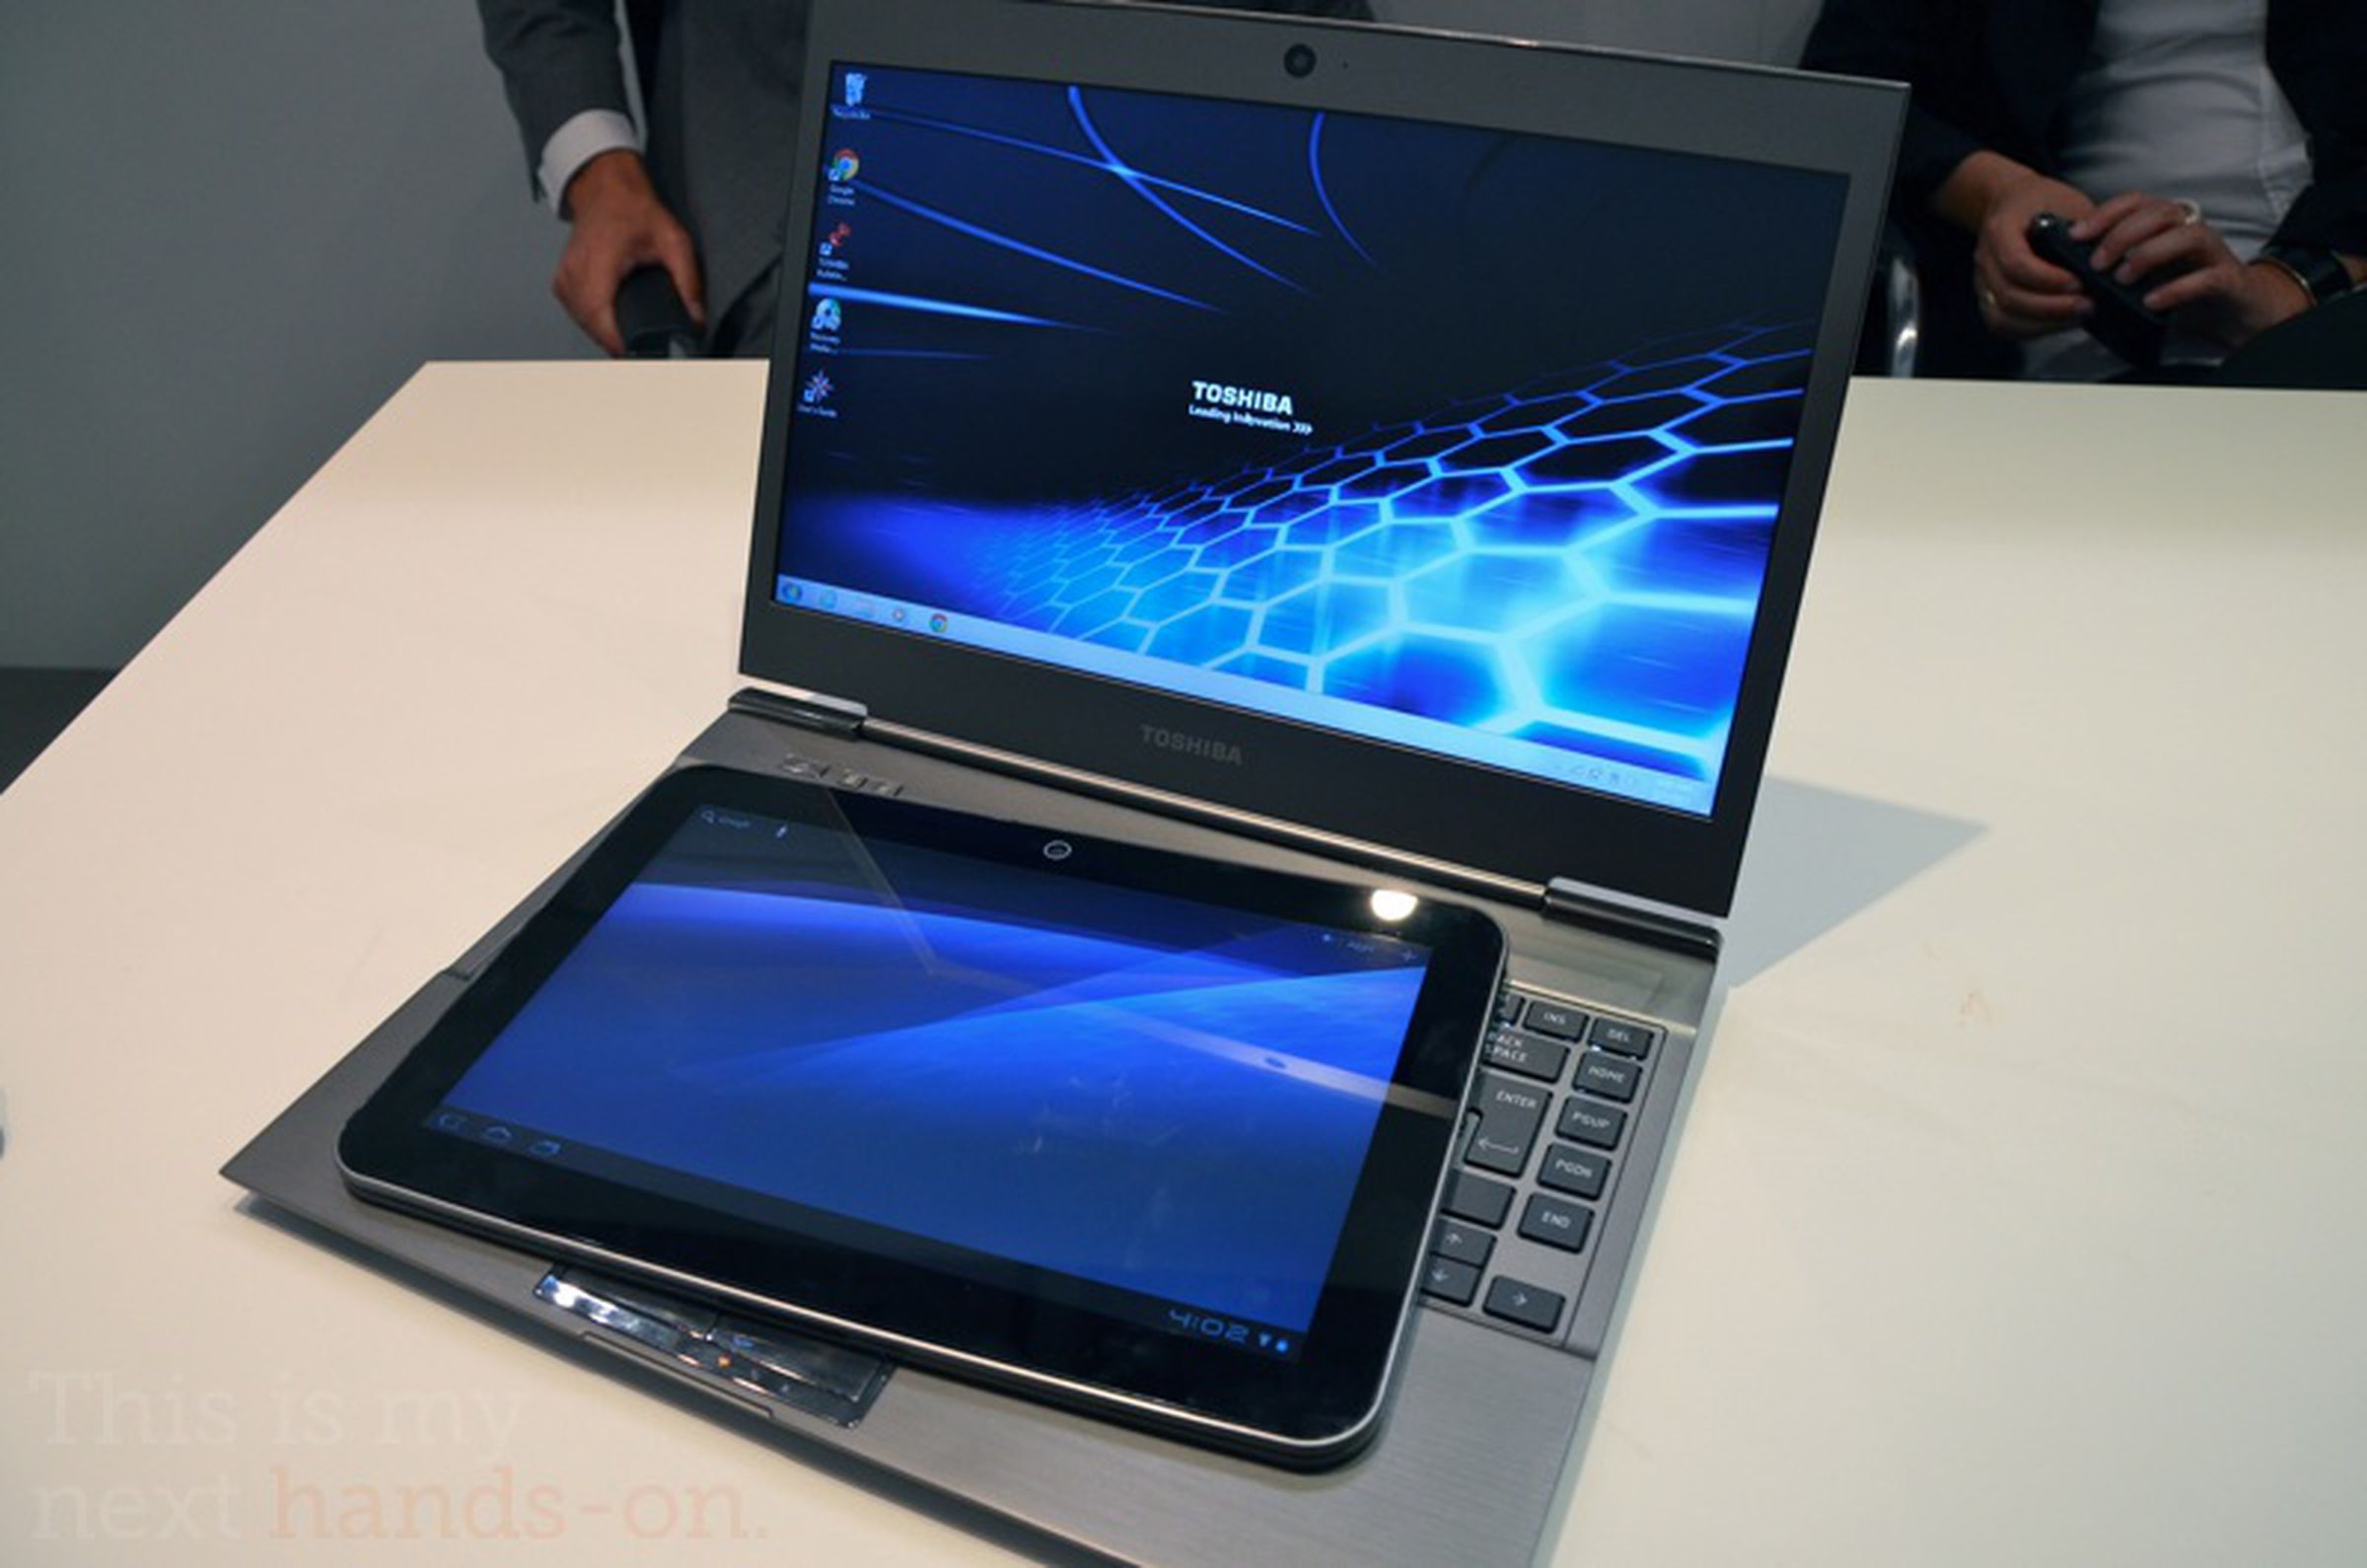 Toshiba Excite / AT200 tablet hands-on photos